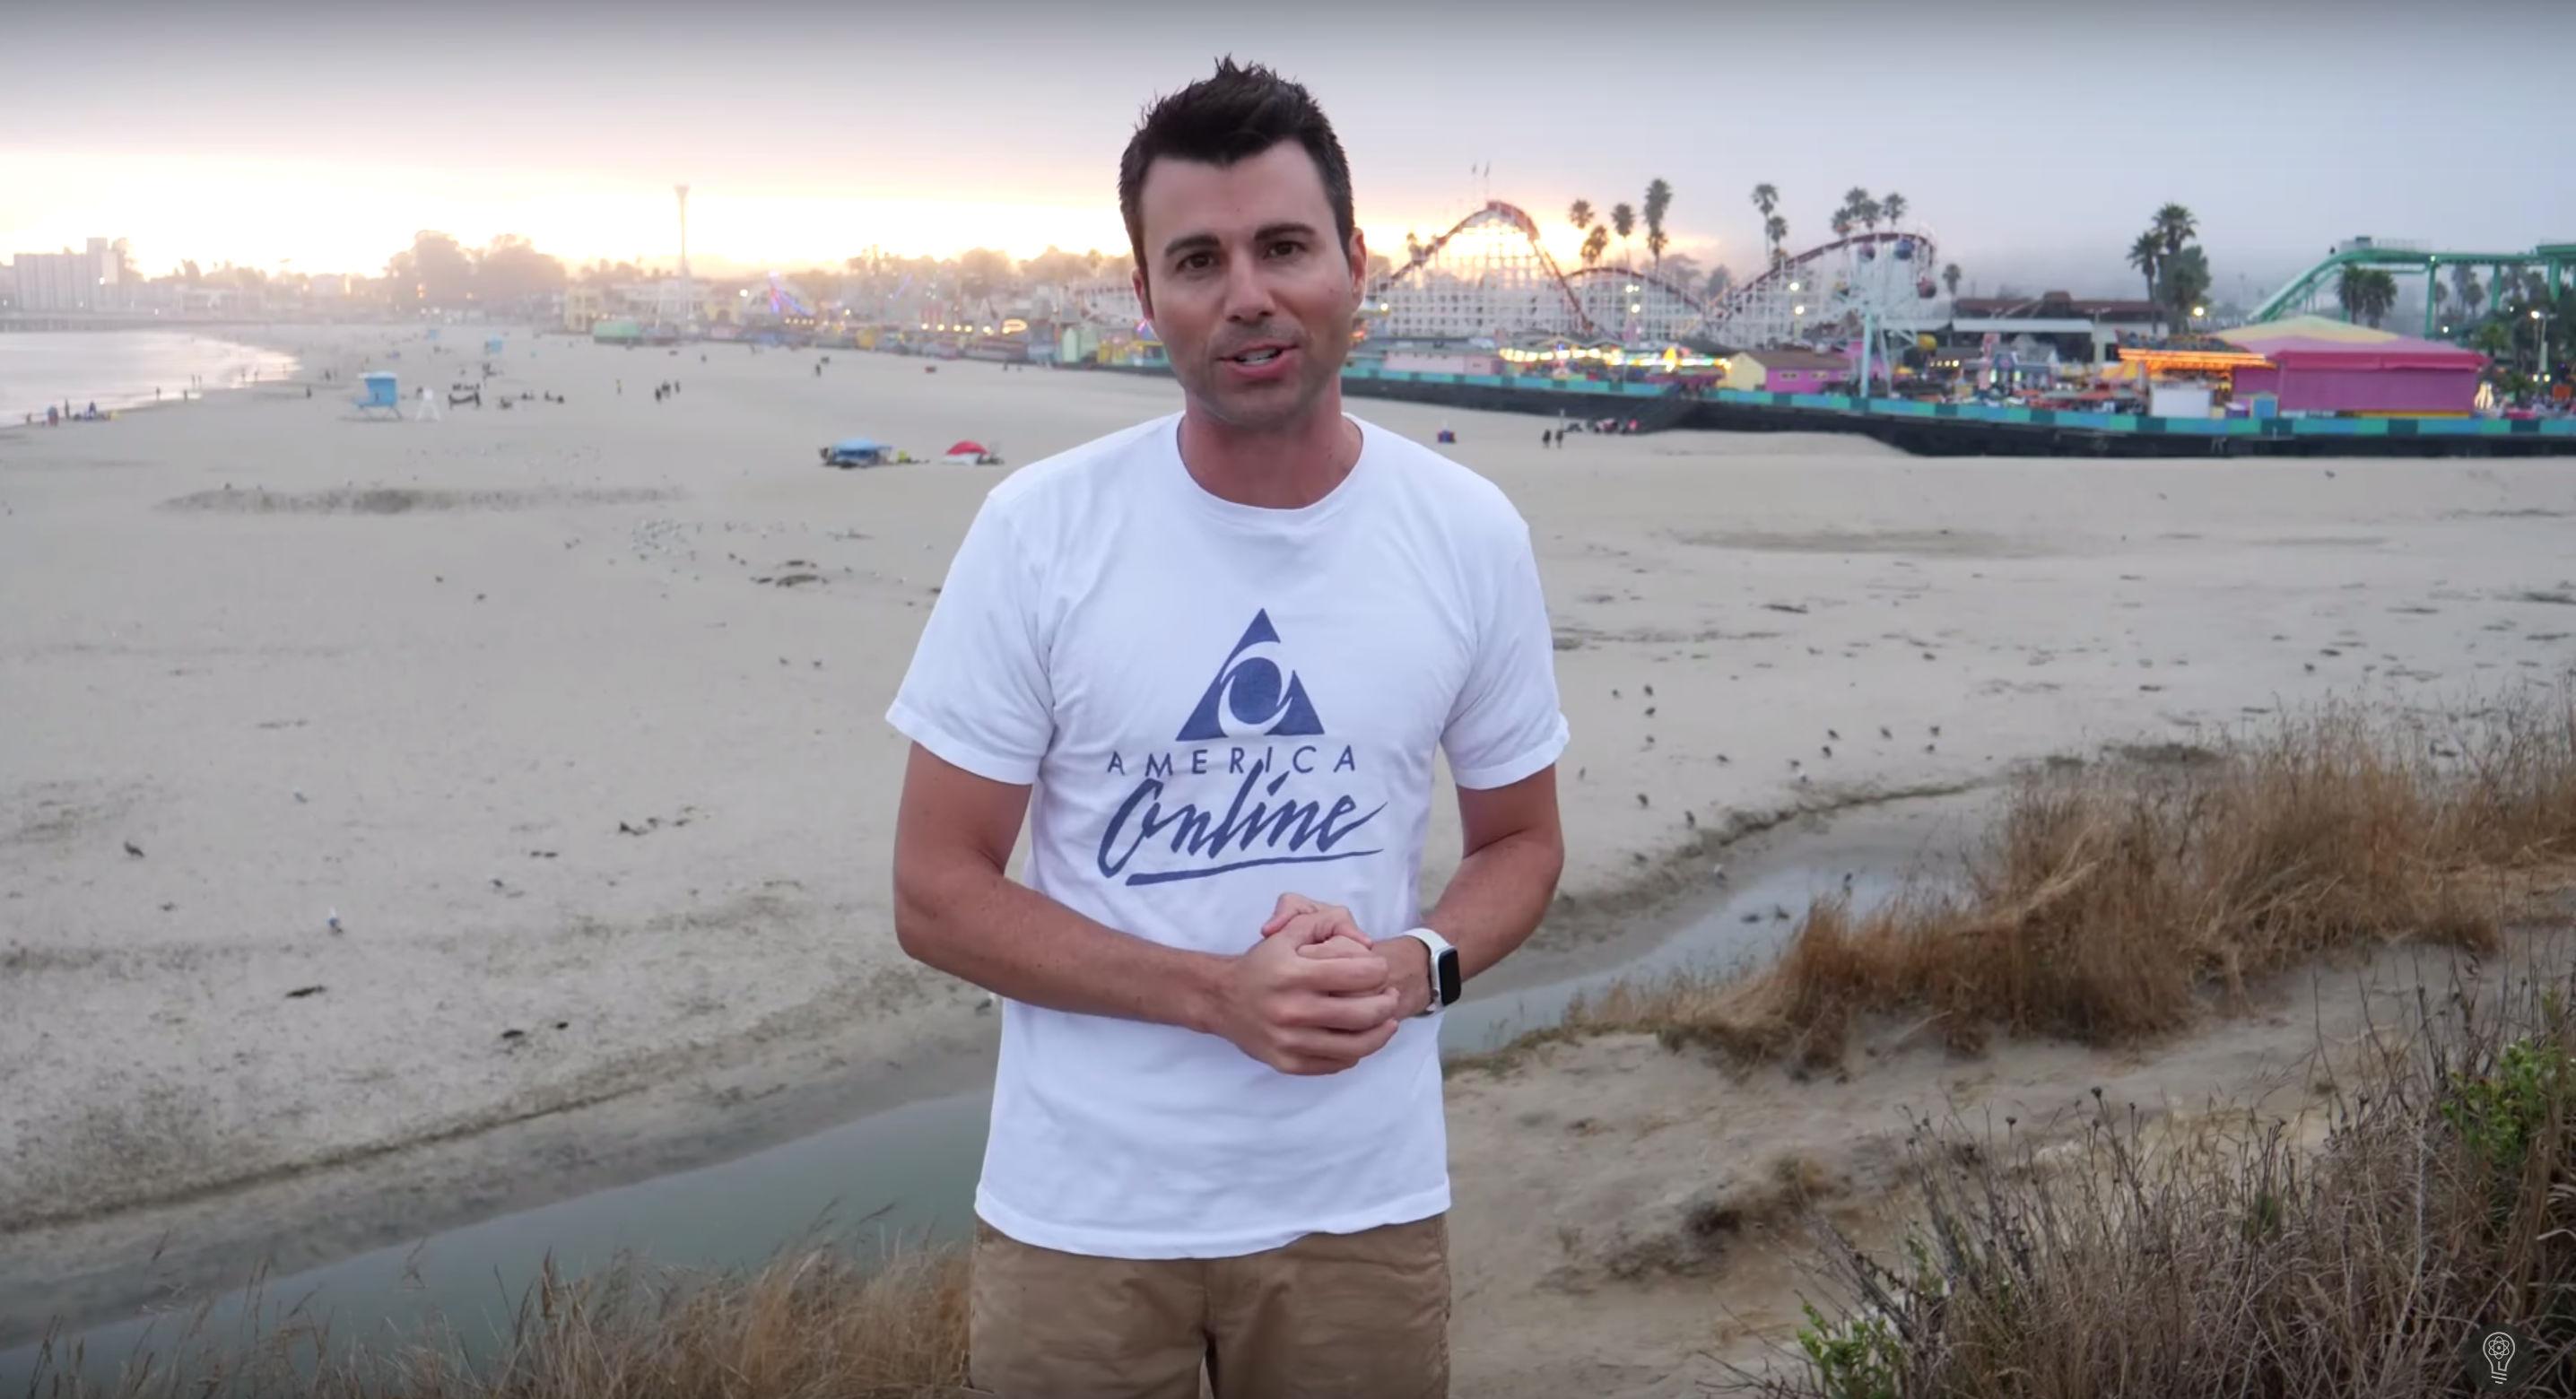 Who Is Mark Rober? Meet the Amazing NASA Engineer Turned YouTuber